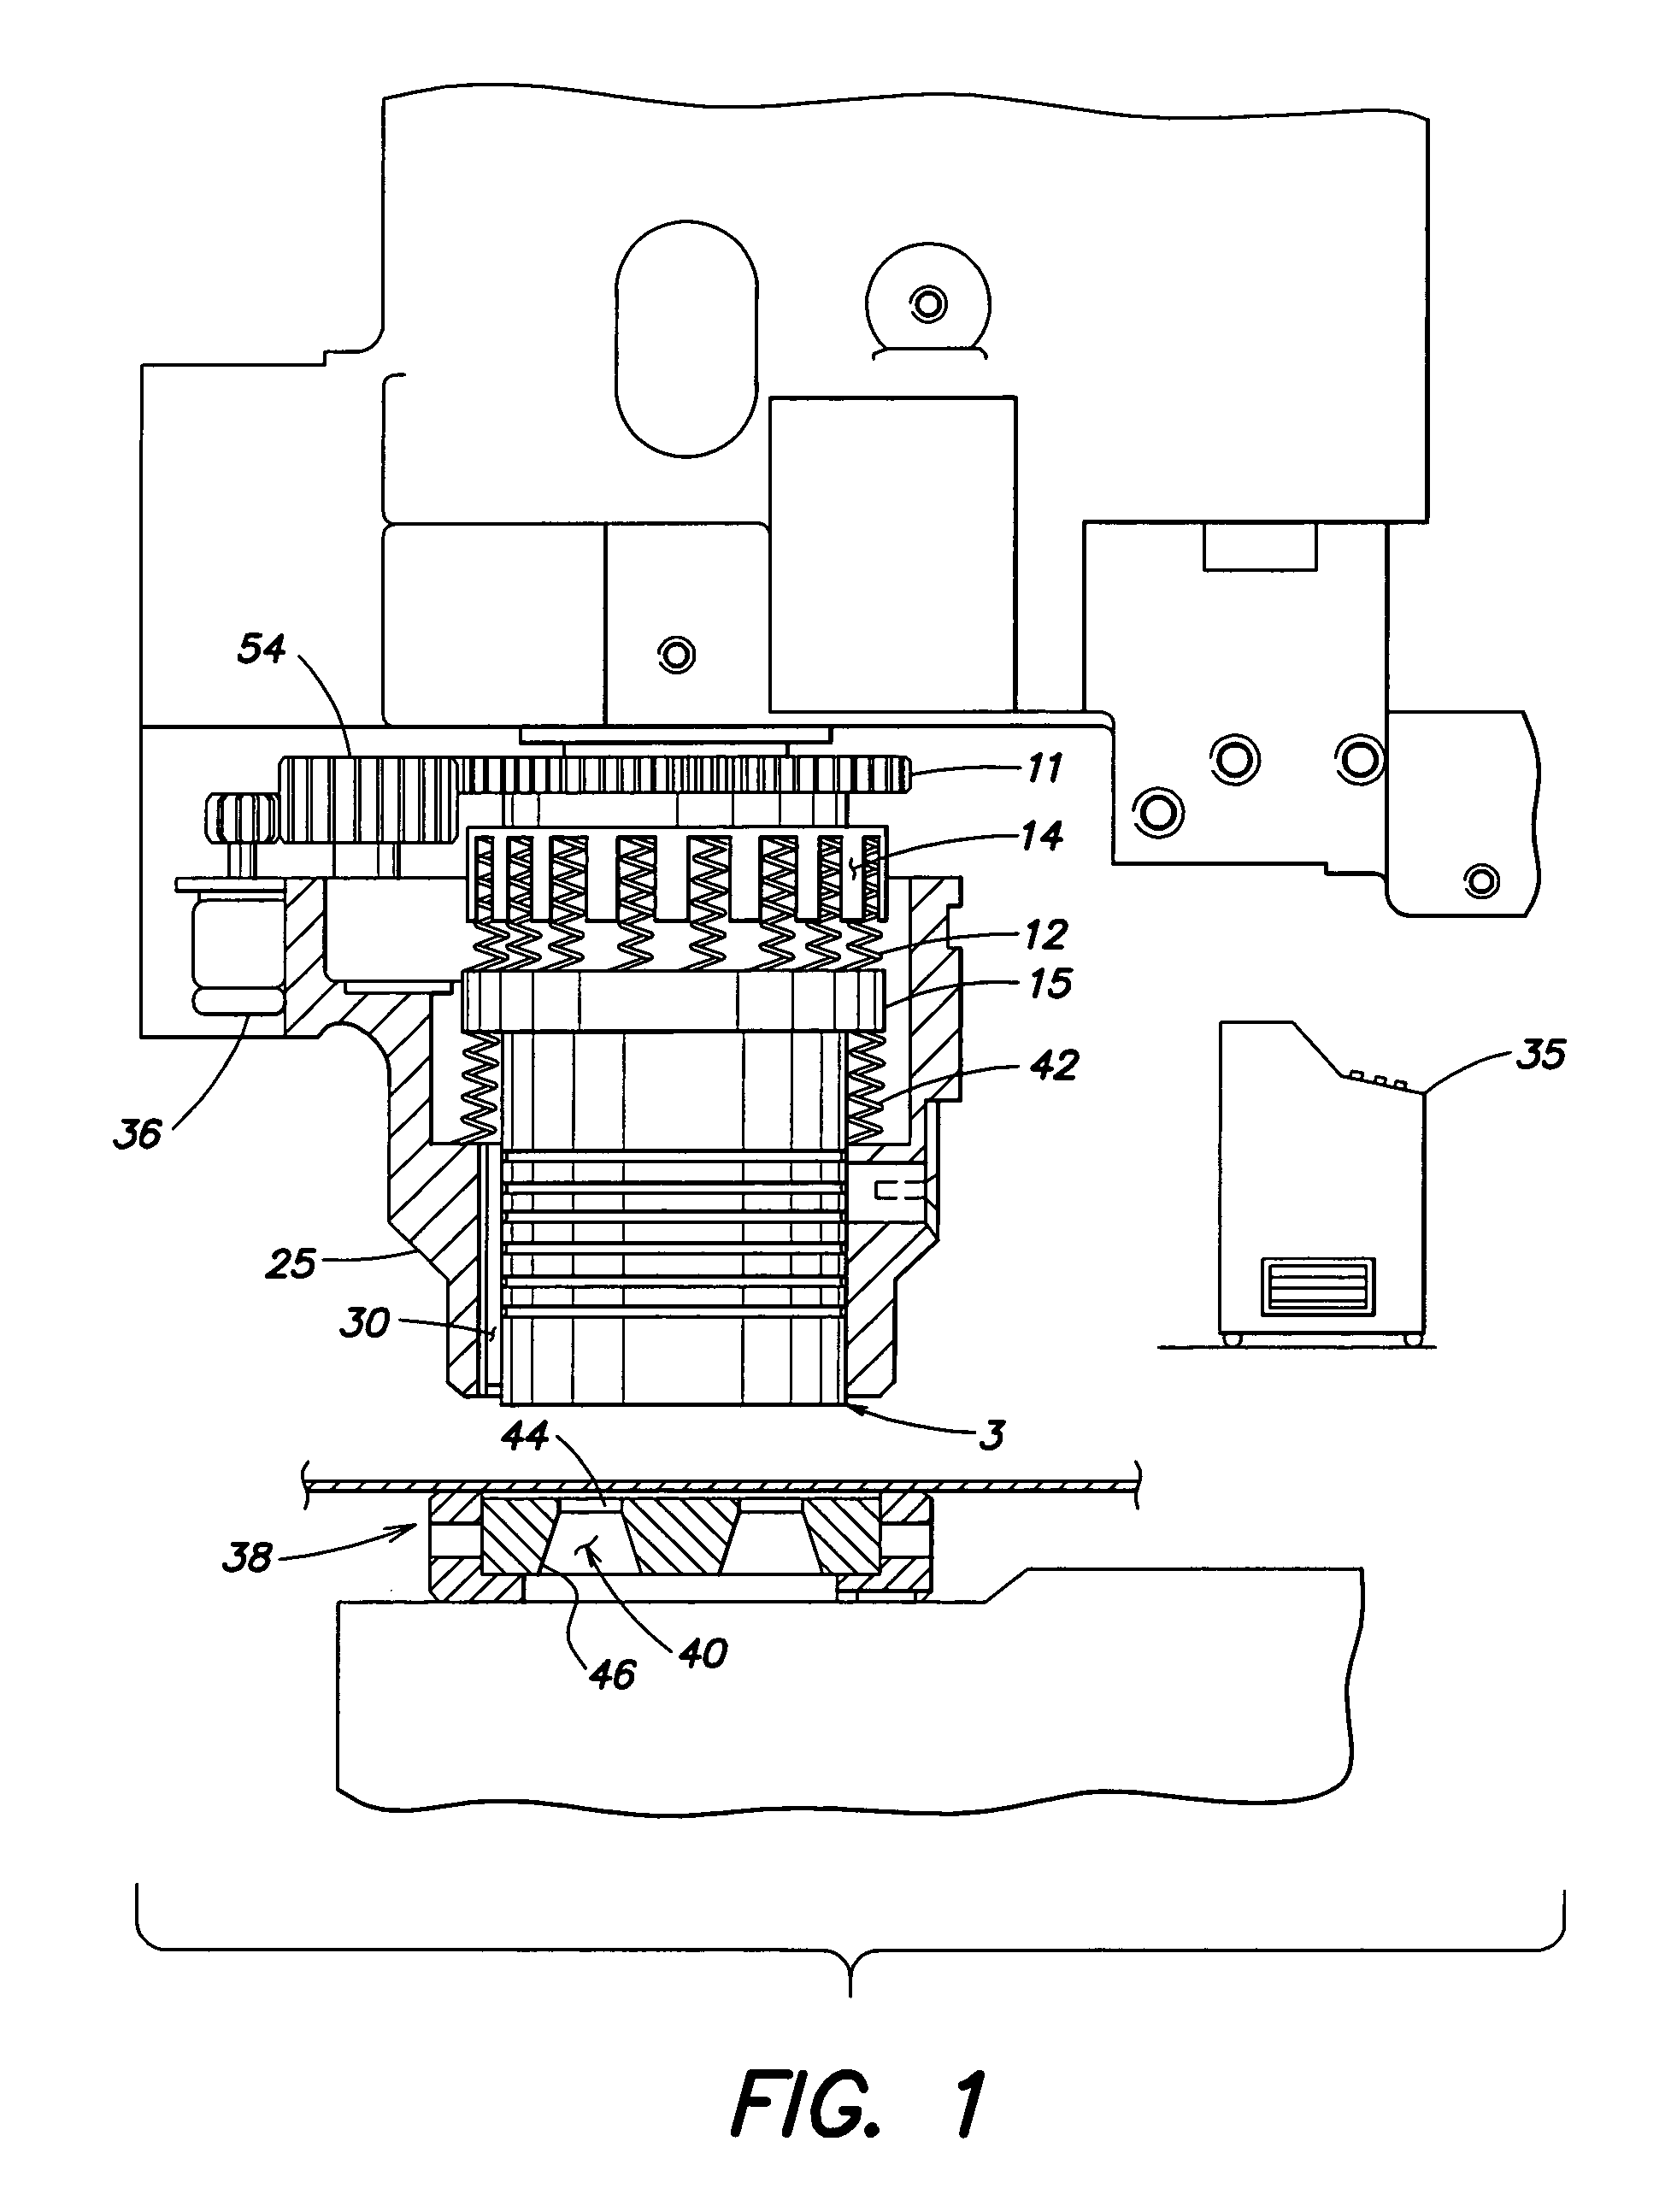 Quick-extraction punch-holder adapter for converting punching machines from a single-punch to a multiple-punch configuration